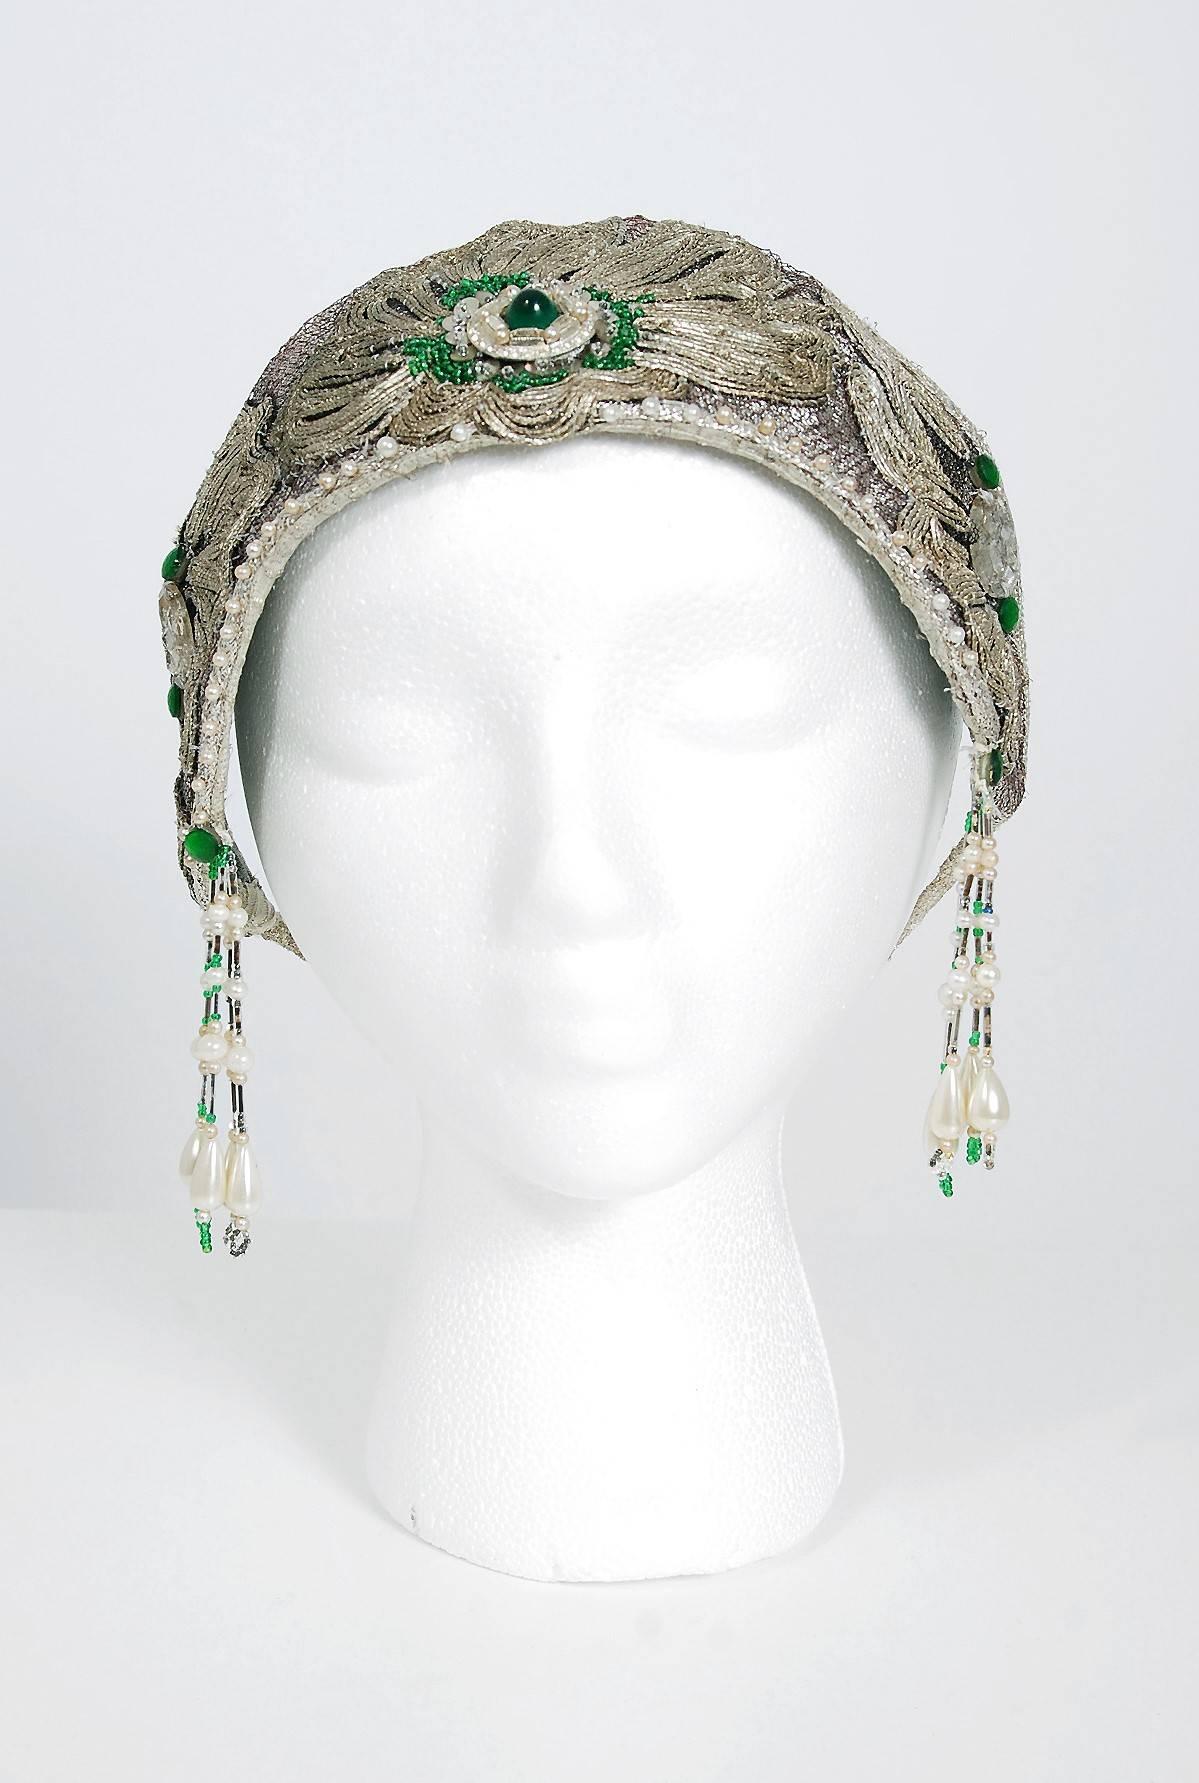 Breathtaking 1920's French metallic silver lamé and emerald-green jeweled flapper headpiece. This is, without a doubt, one of the most extraordinary antique crowns I have ever laid eyes on. Large scale jewels, sequins and glass-beads with tons of